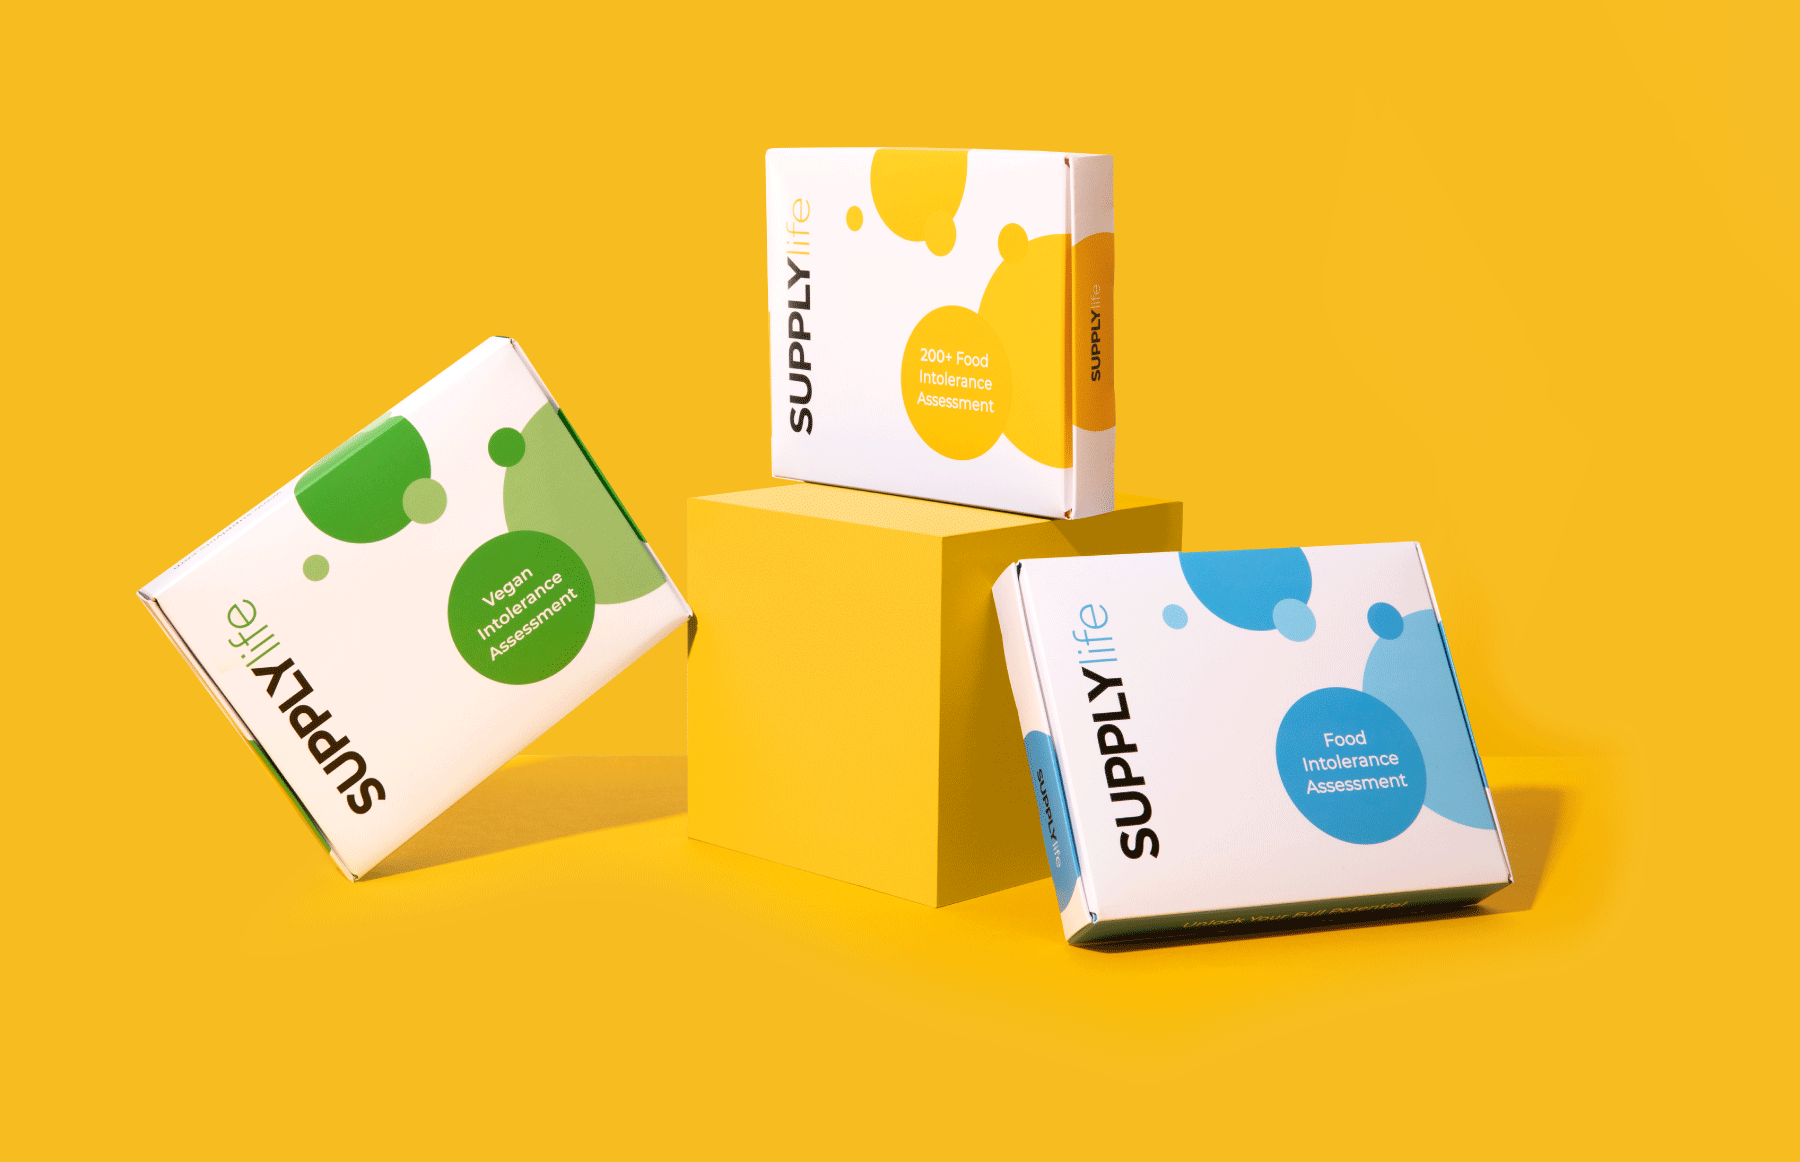 Three food intolerance assessment kits displayed against a vibrant yellow background. The kits are in white boxes with colorful designs: green for 'Intolerance Assessment', yellow for '200+ Food Intolerance Assessment', and blue for 'Food Intolerance Assessment'.